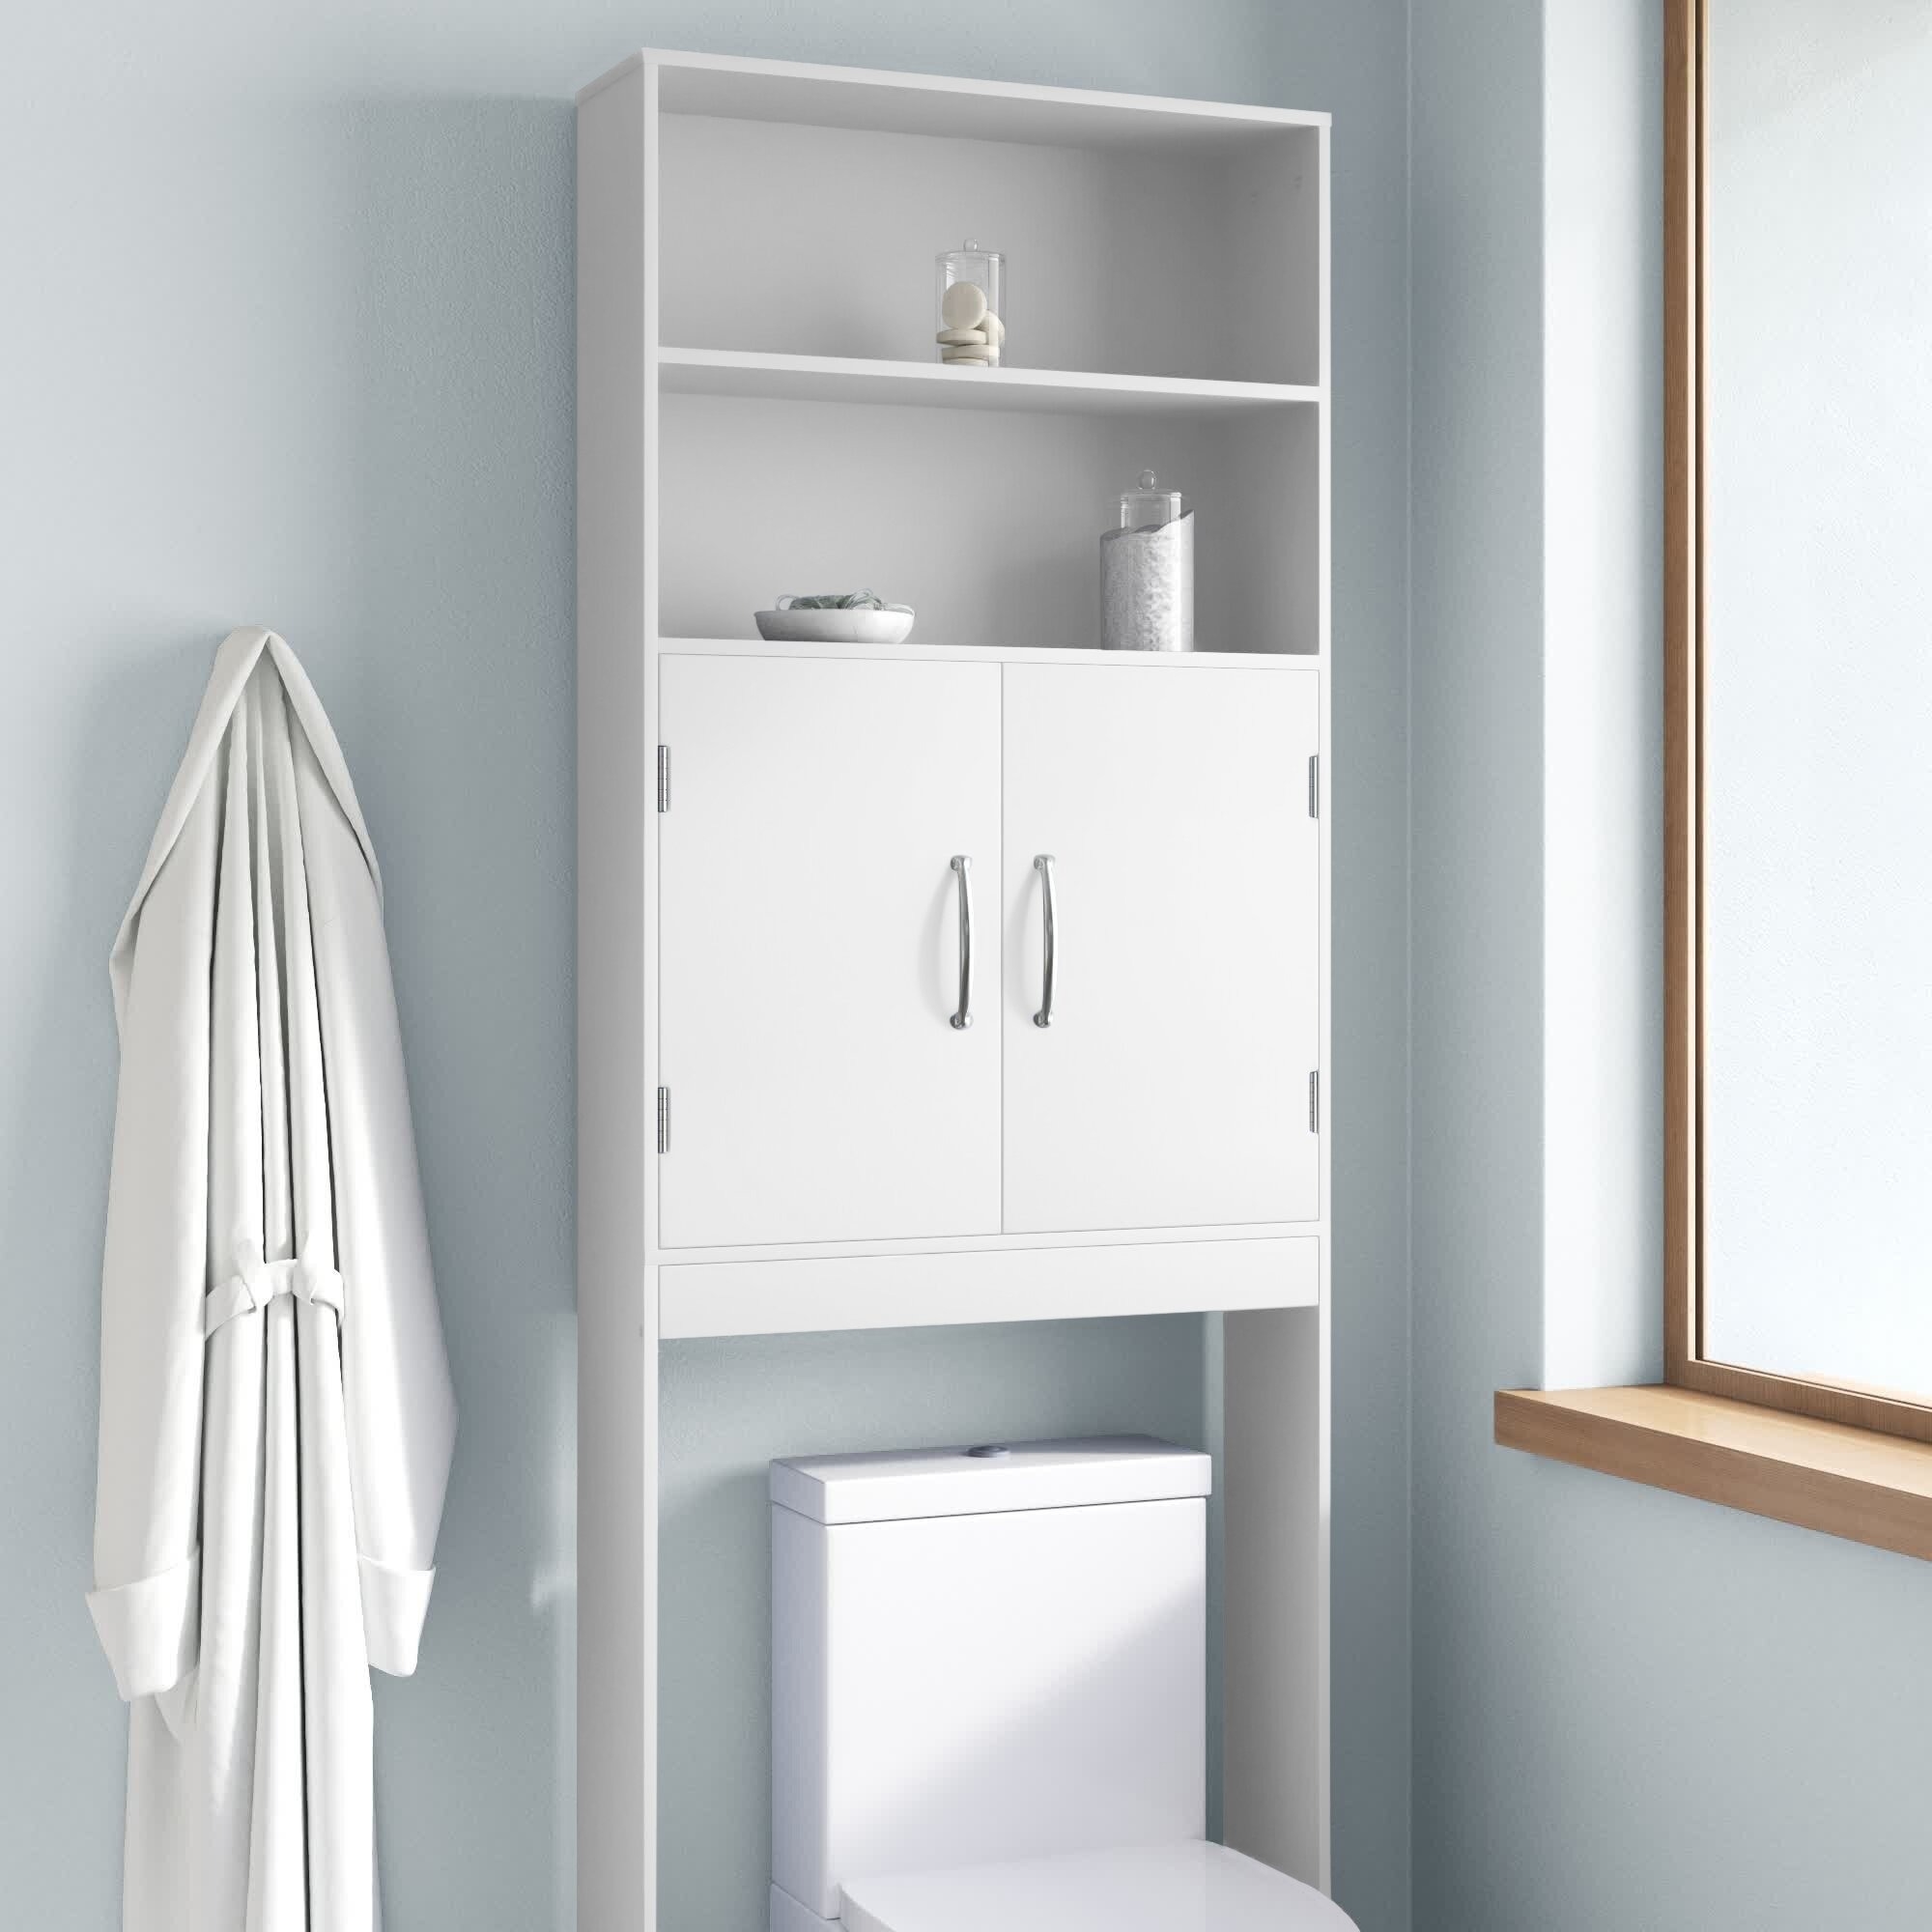 White bathroom cabinet over a toilet, with shelves and closed compartments